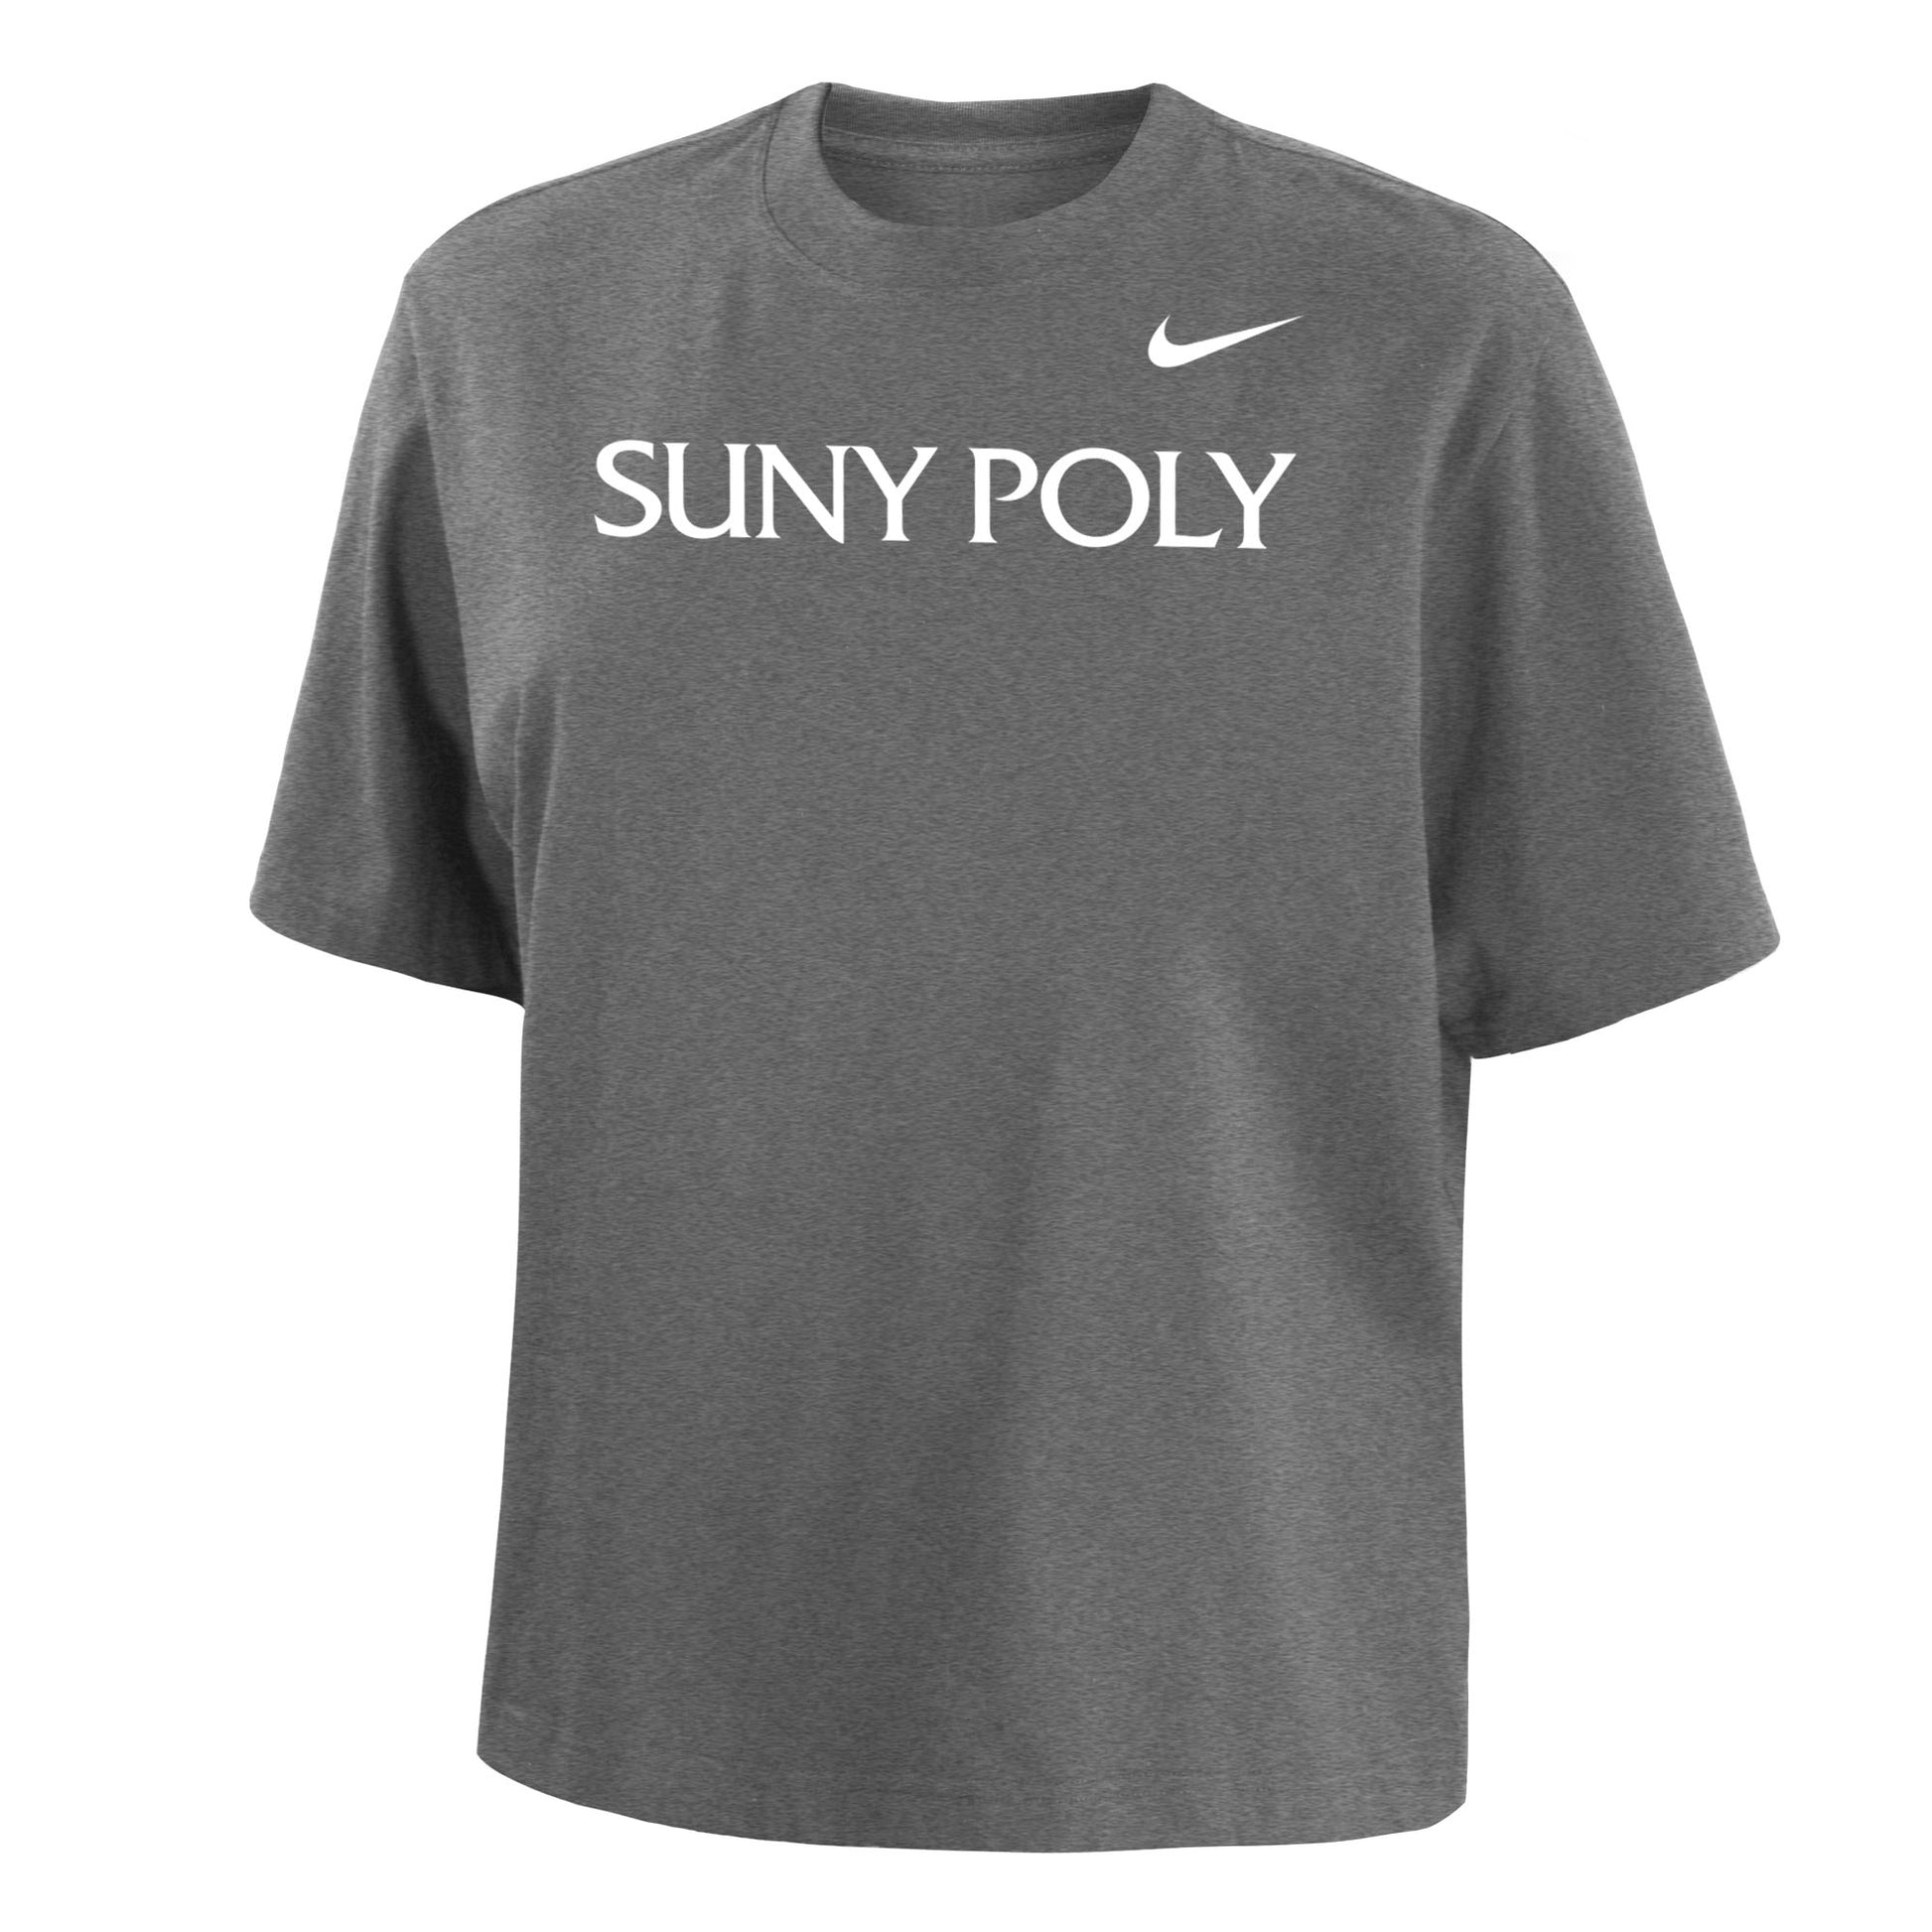 Gray short sleeve t-shirt with SUNY POLY in caps across chest. Nike swoosh on upper left chest.